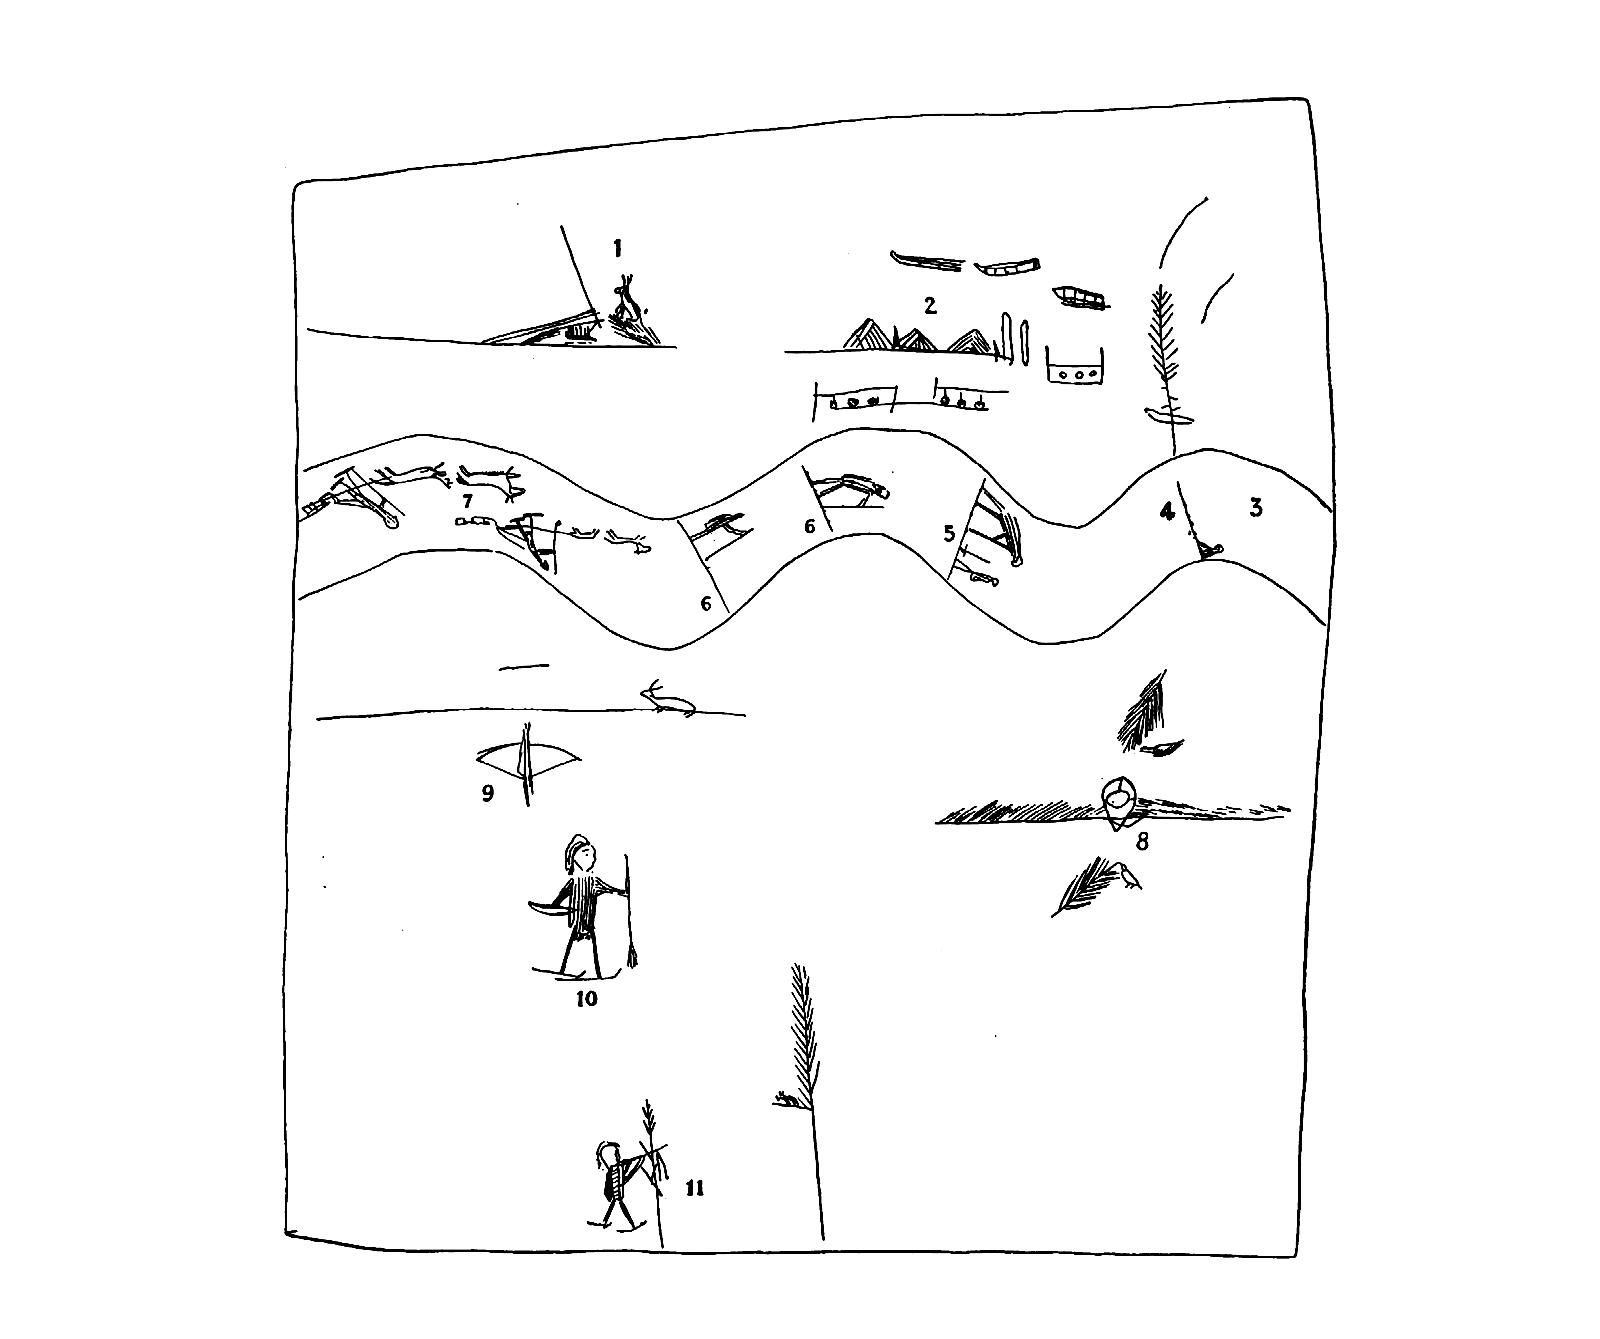 A Yukaghir map, originally carved into birchbark, reproduced in “The Yukaghir and the Yukaghirized Tungus.” The image was captioned: “Picture writing of scenes of winter life.”